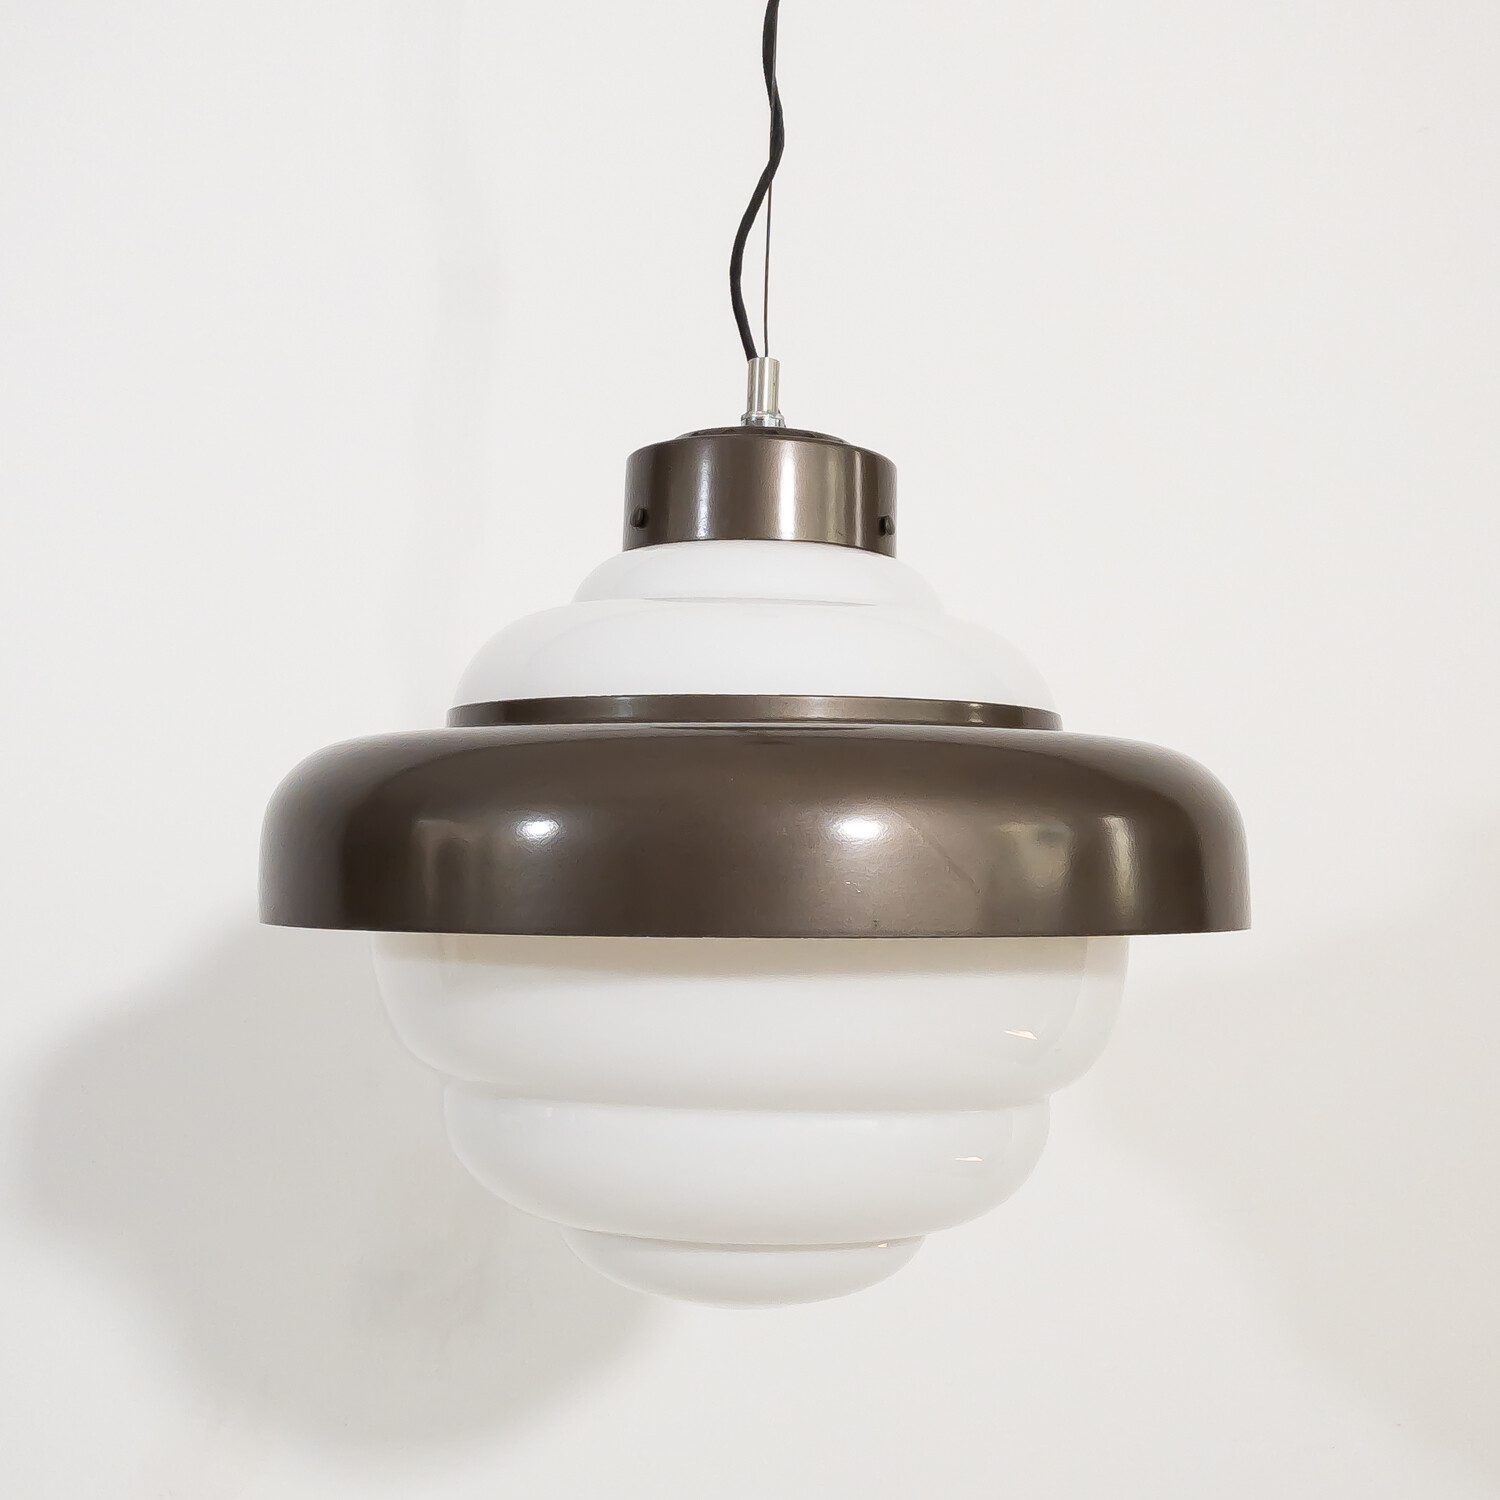 Suspension lamp by Luxgianka Lissone, Italy 1980s